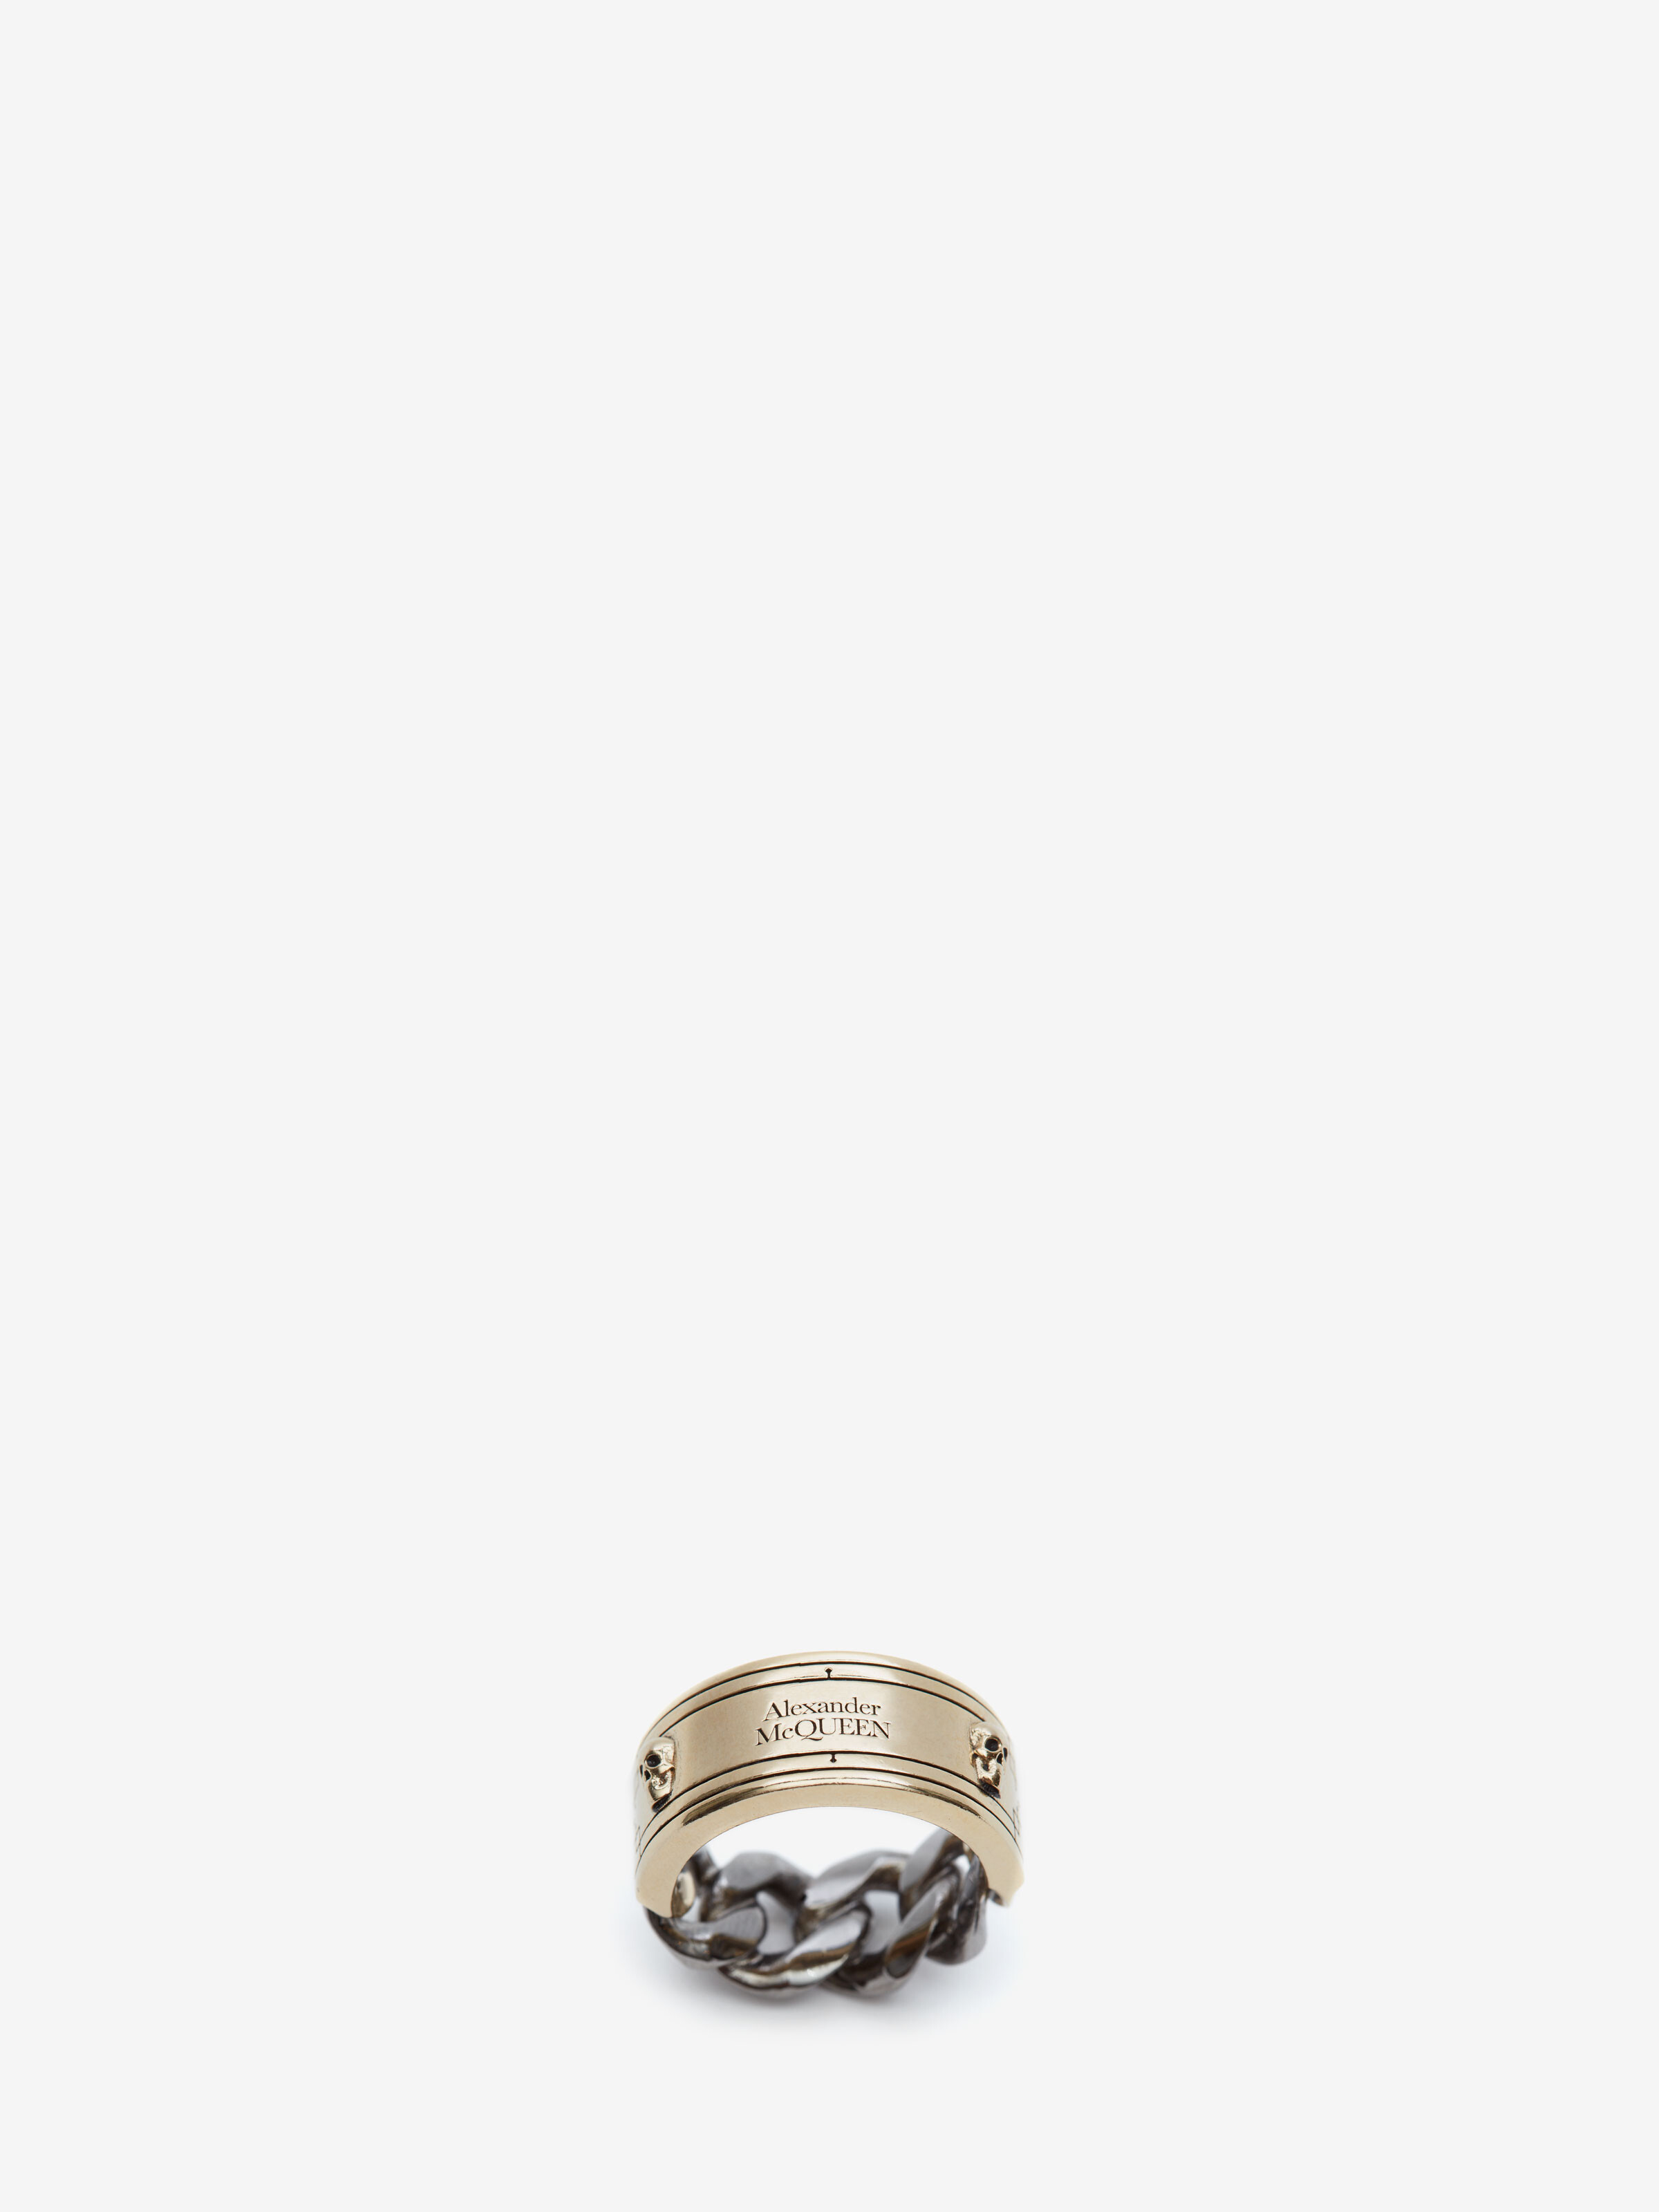 Alexander Mcqueen Identity Chain Ring In Pale Gold